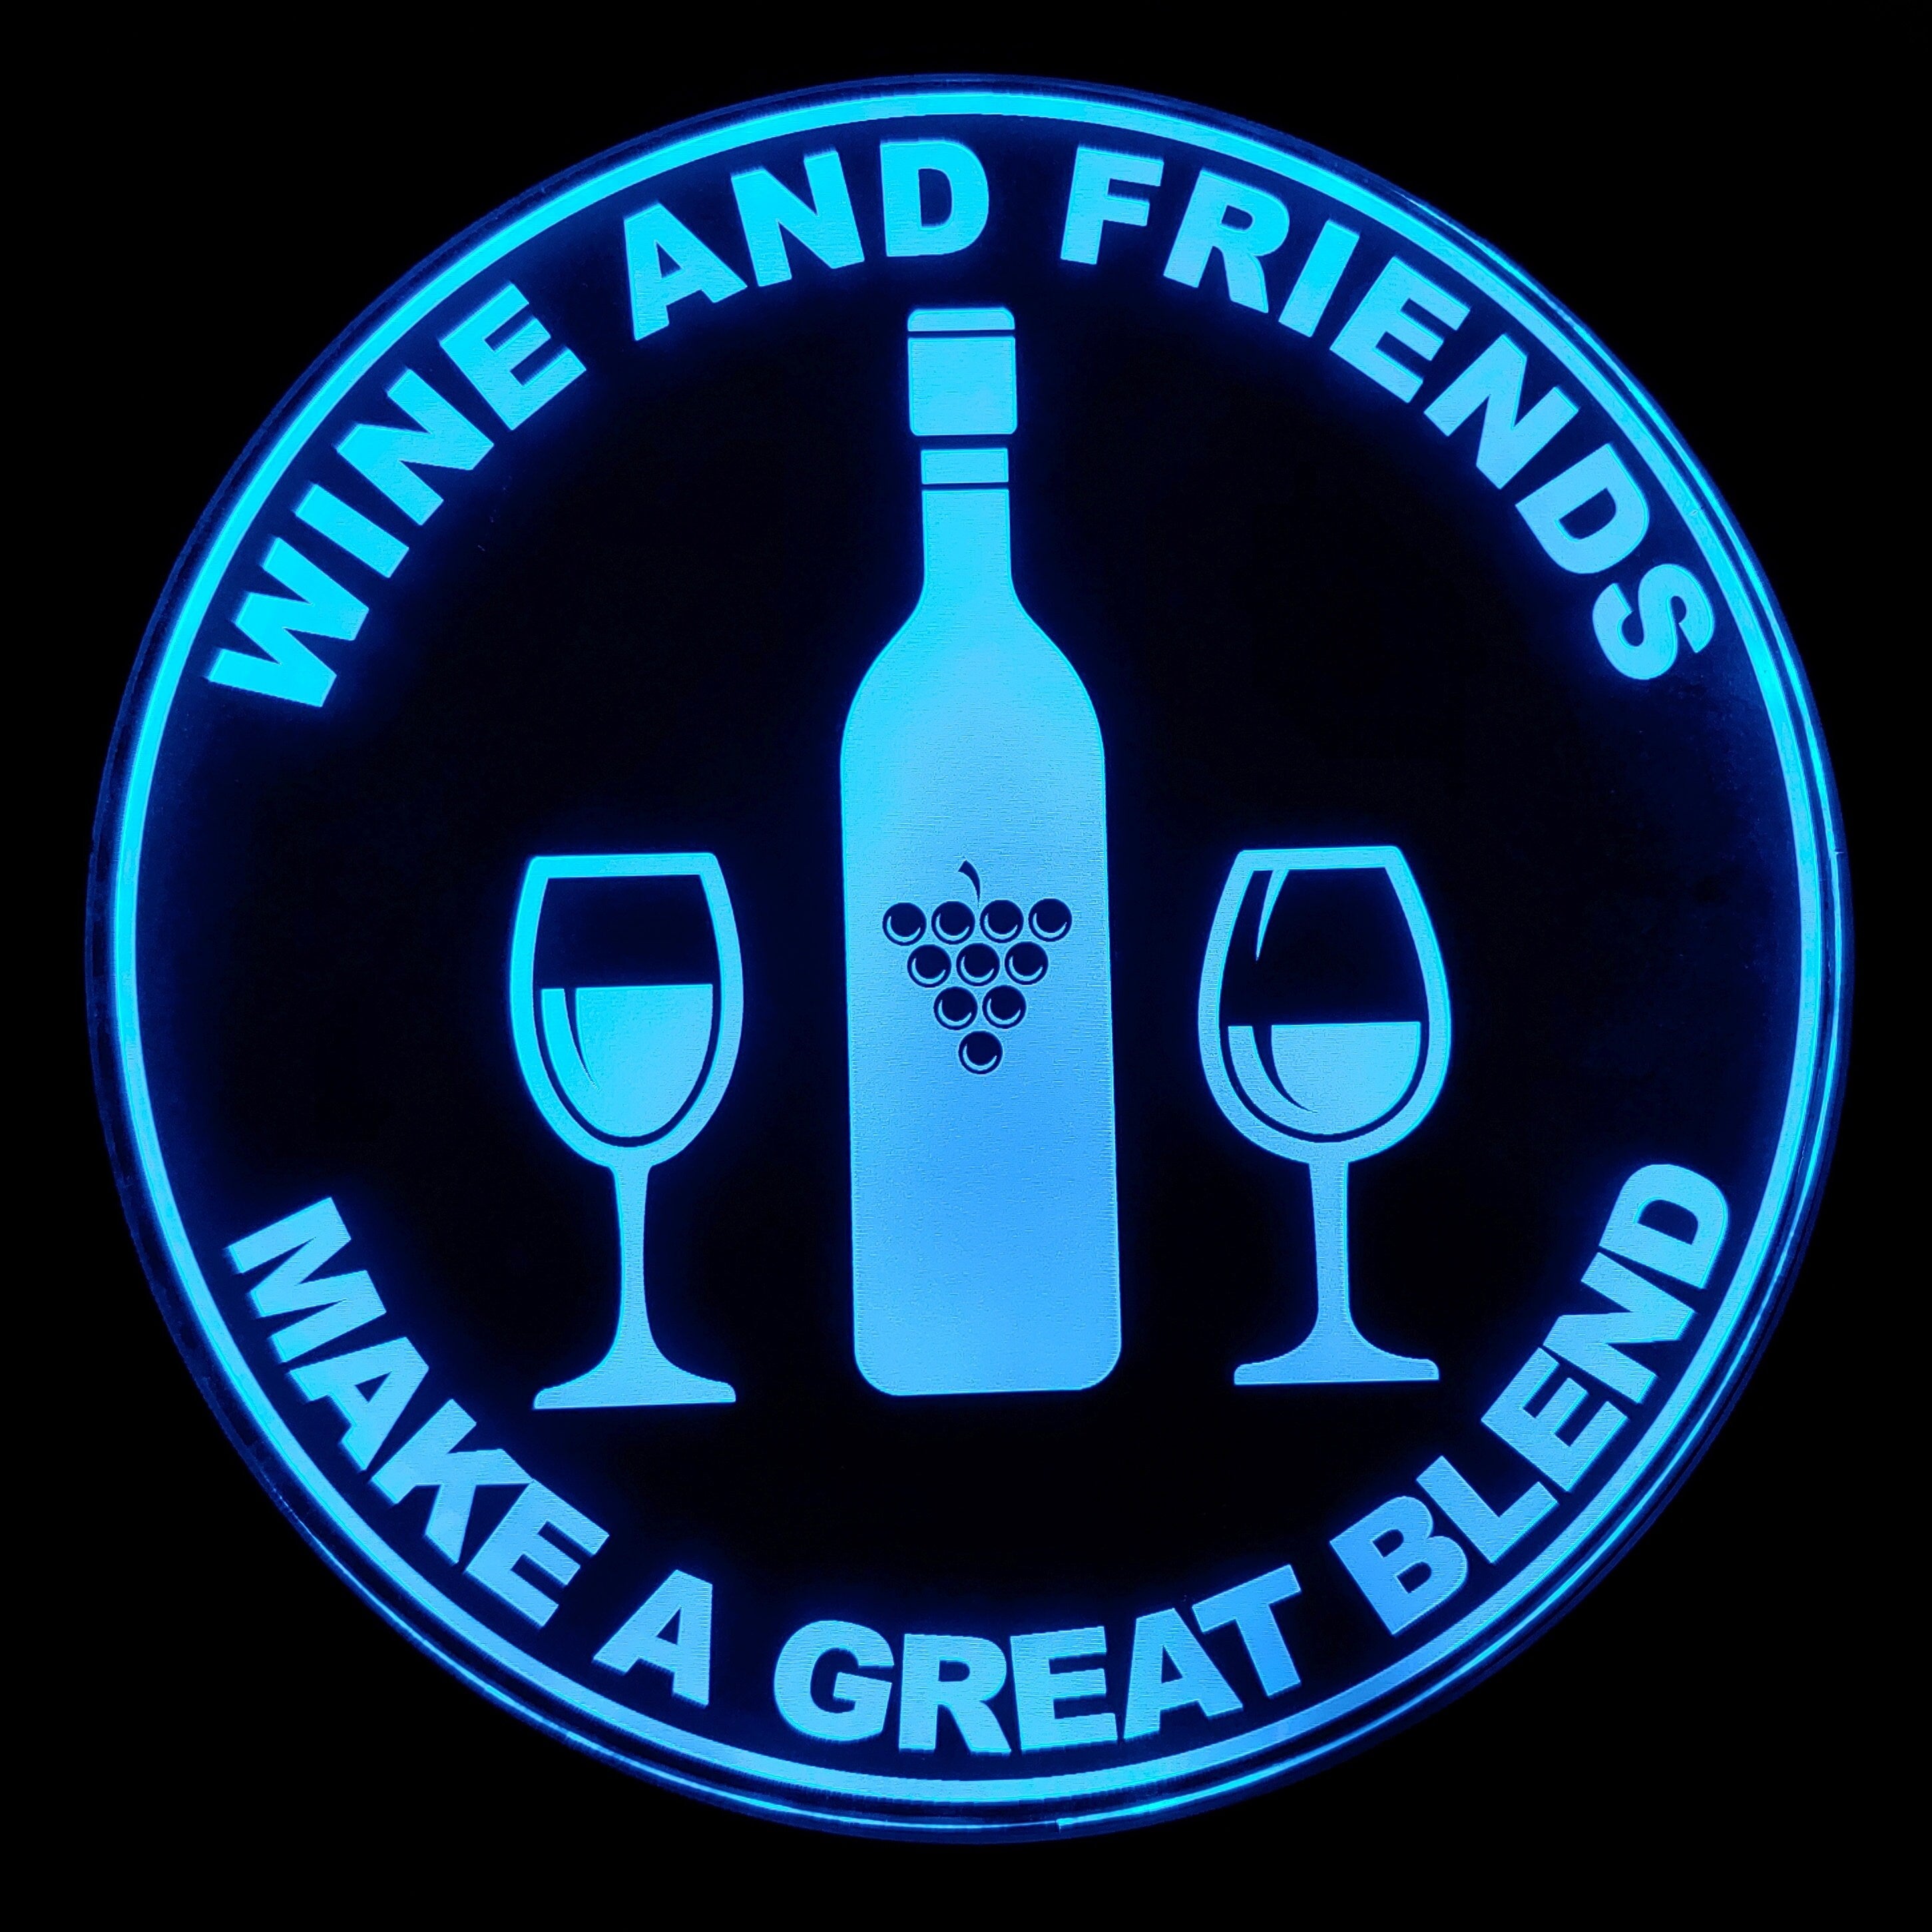 Wine and Friends LED Wall Sign Neon Like - Color Changing Remote Control - 4 Sizes Made in USA Free Shipping